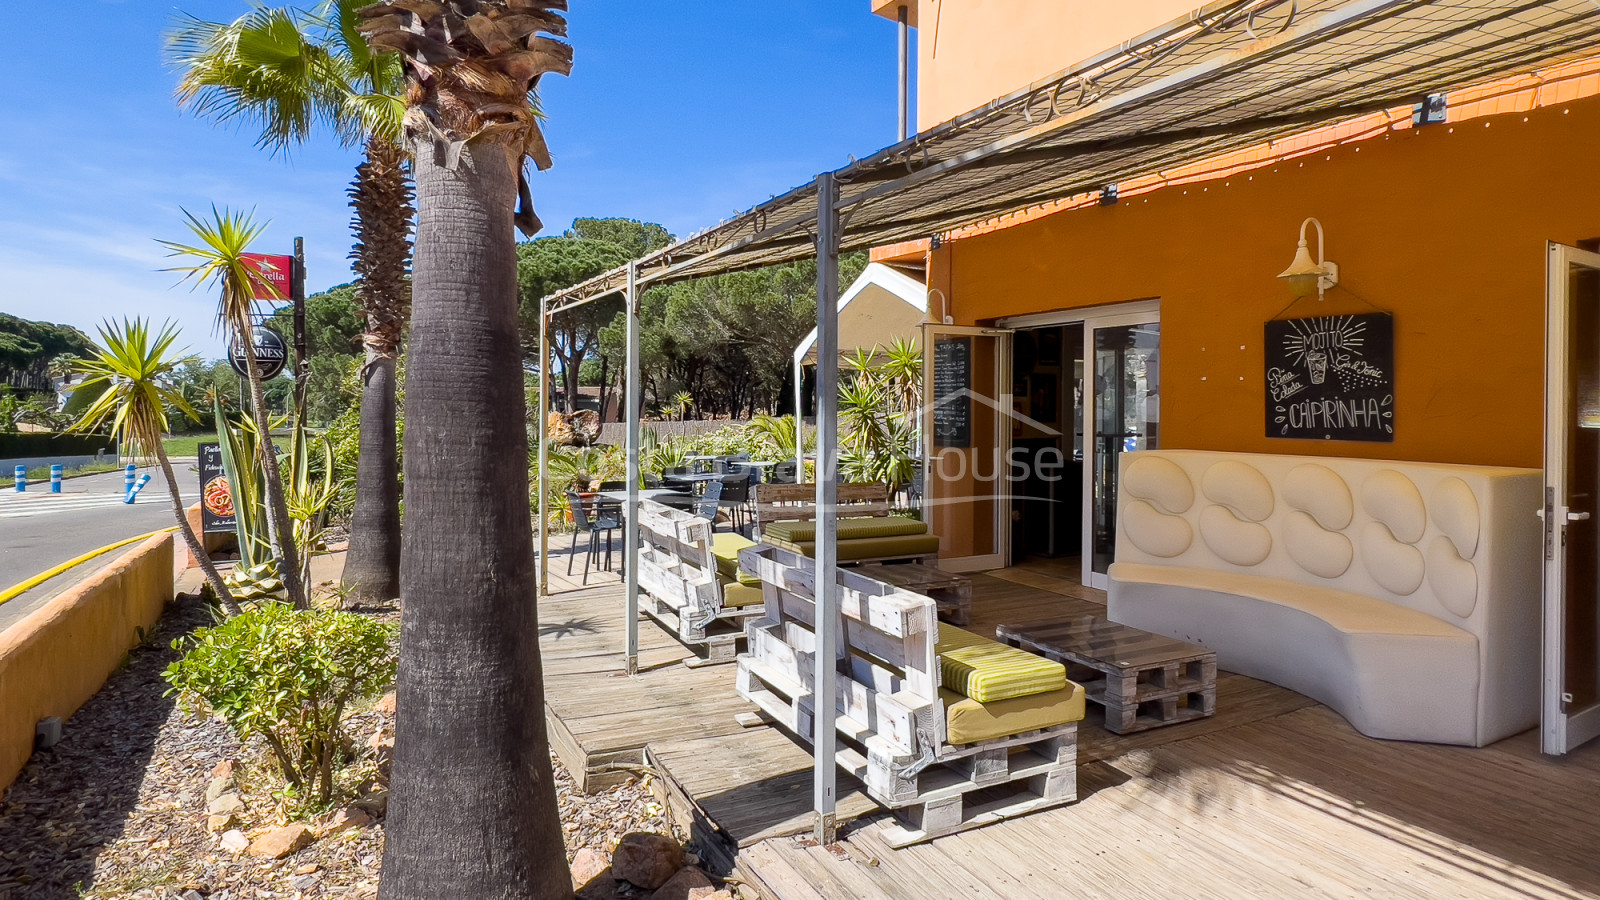 Aparthotel with 6 apartments for sale on the beach of Pals